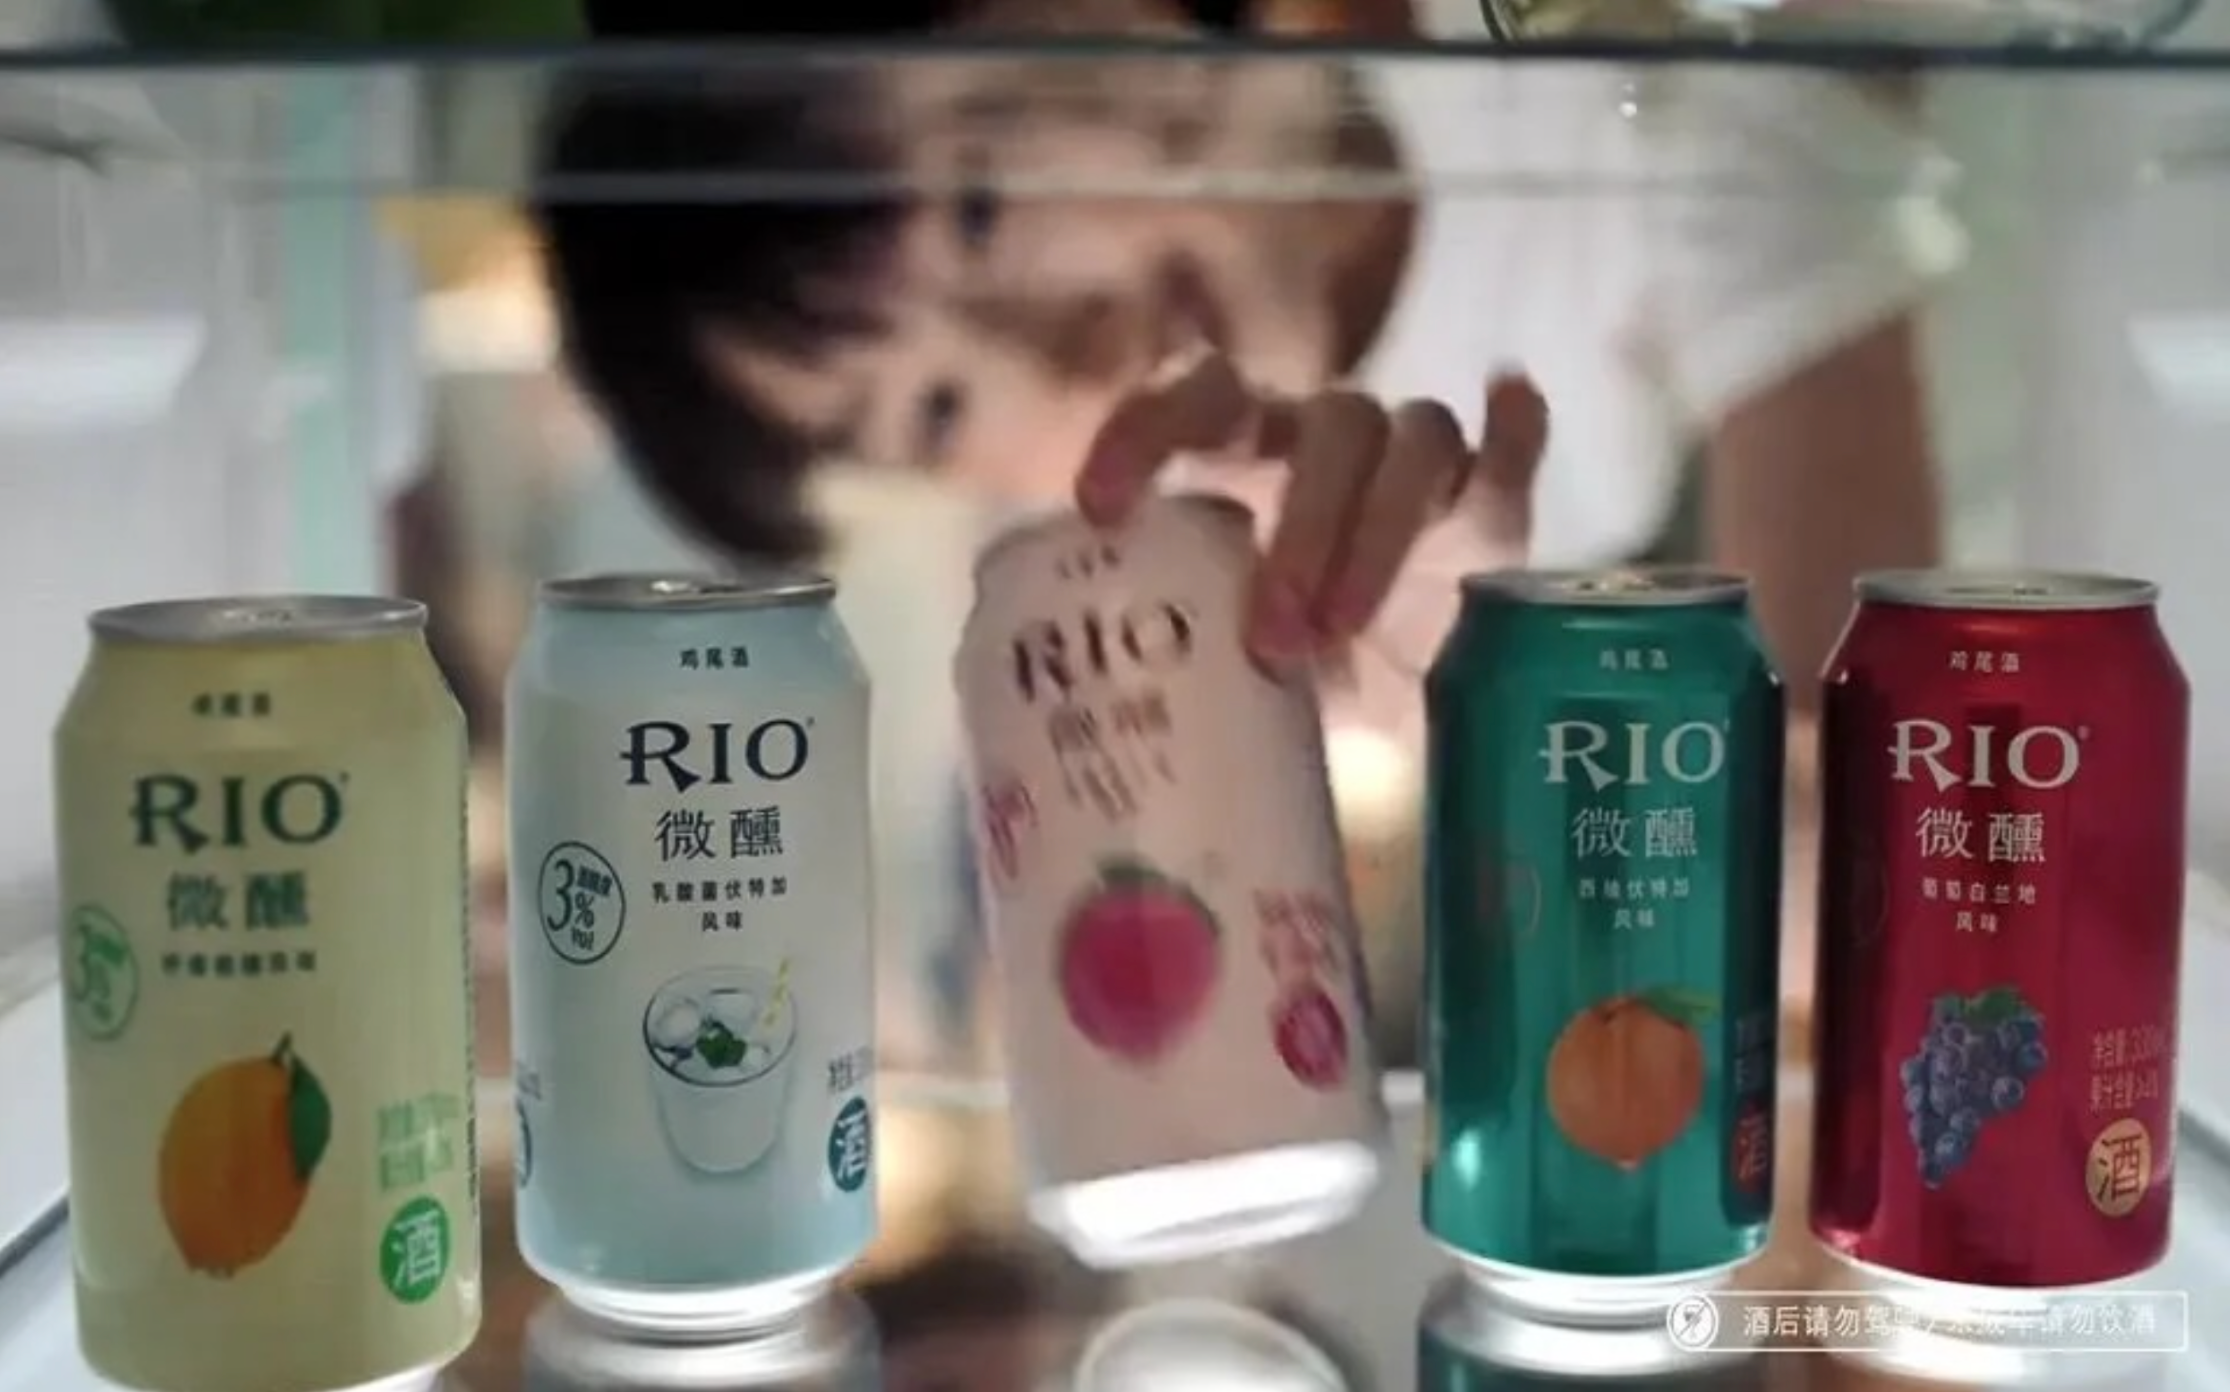 Alcopop brand Rio sponsored homebody-centric streaming programs in China during the pandemic to reach those kept indoors.